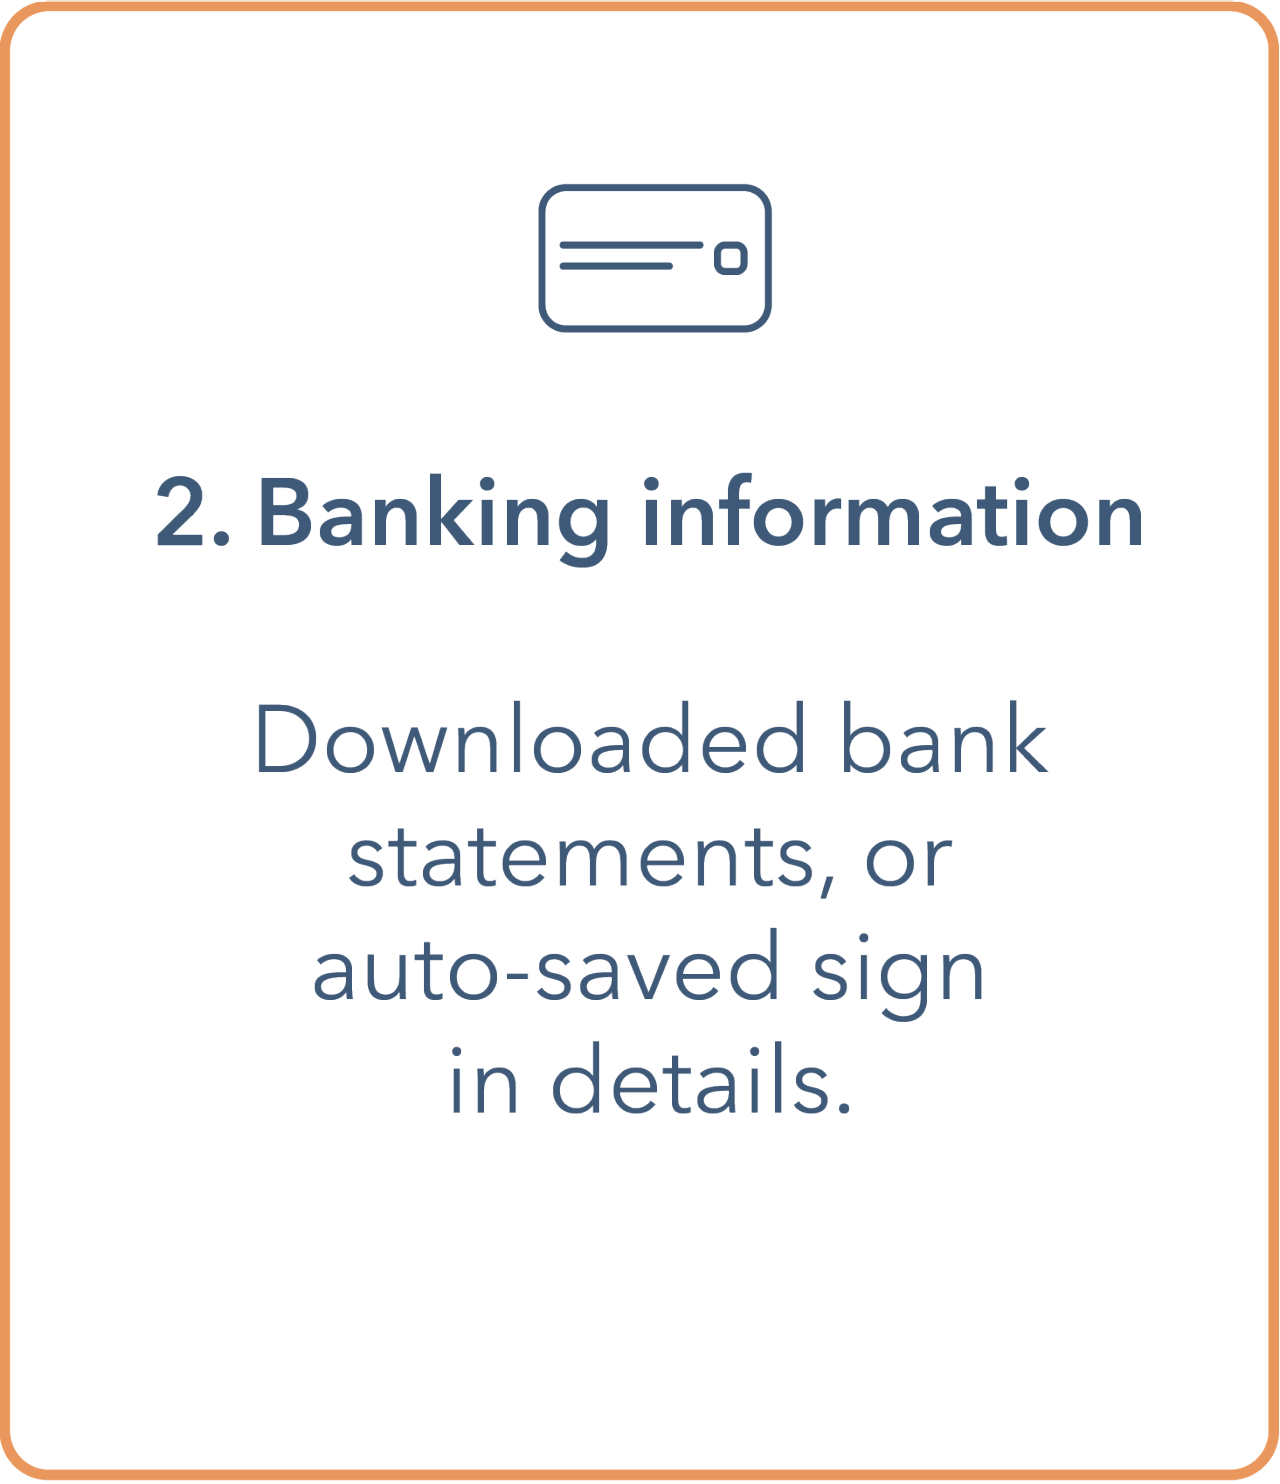 Image shows a tile with an outline of a credit card at the top. Underneath is a bullet point containing '2. Banking information'. The main body underneath contains 'downloaded bank statements, or auto-saved sign in details.' Tile has an orange outline border and text is in dark blue.